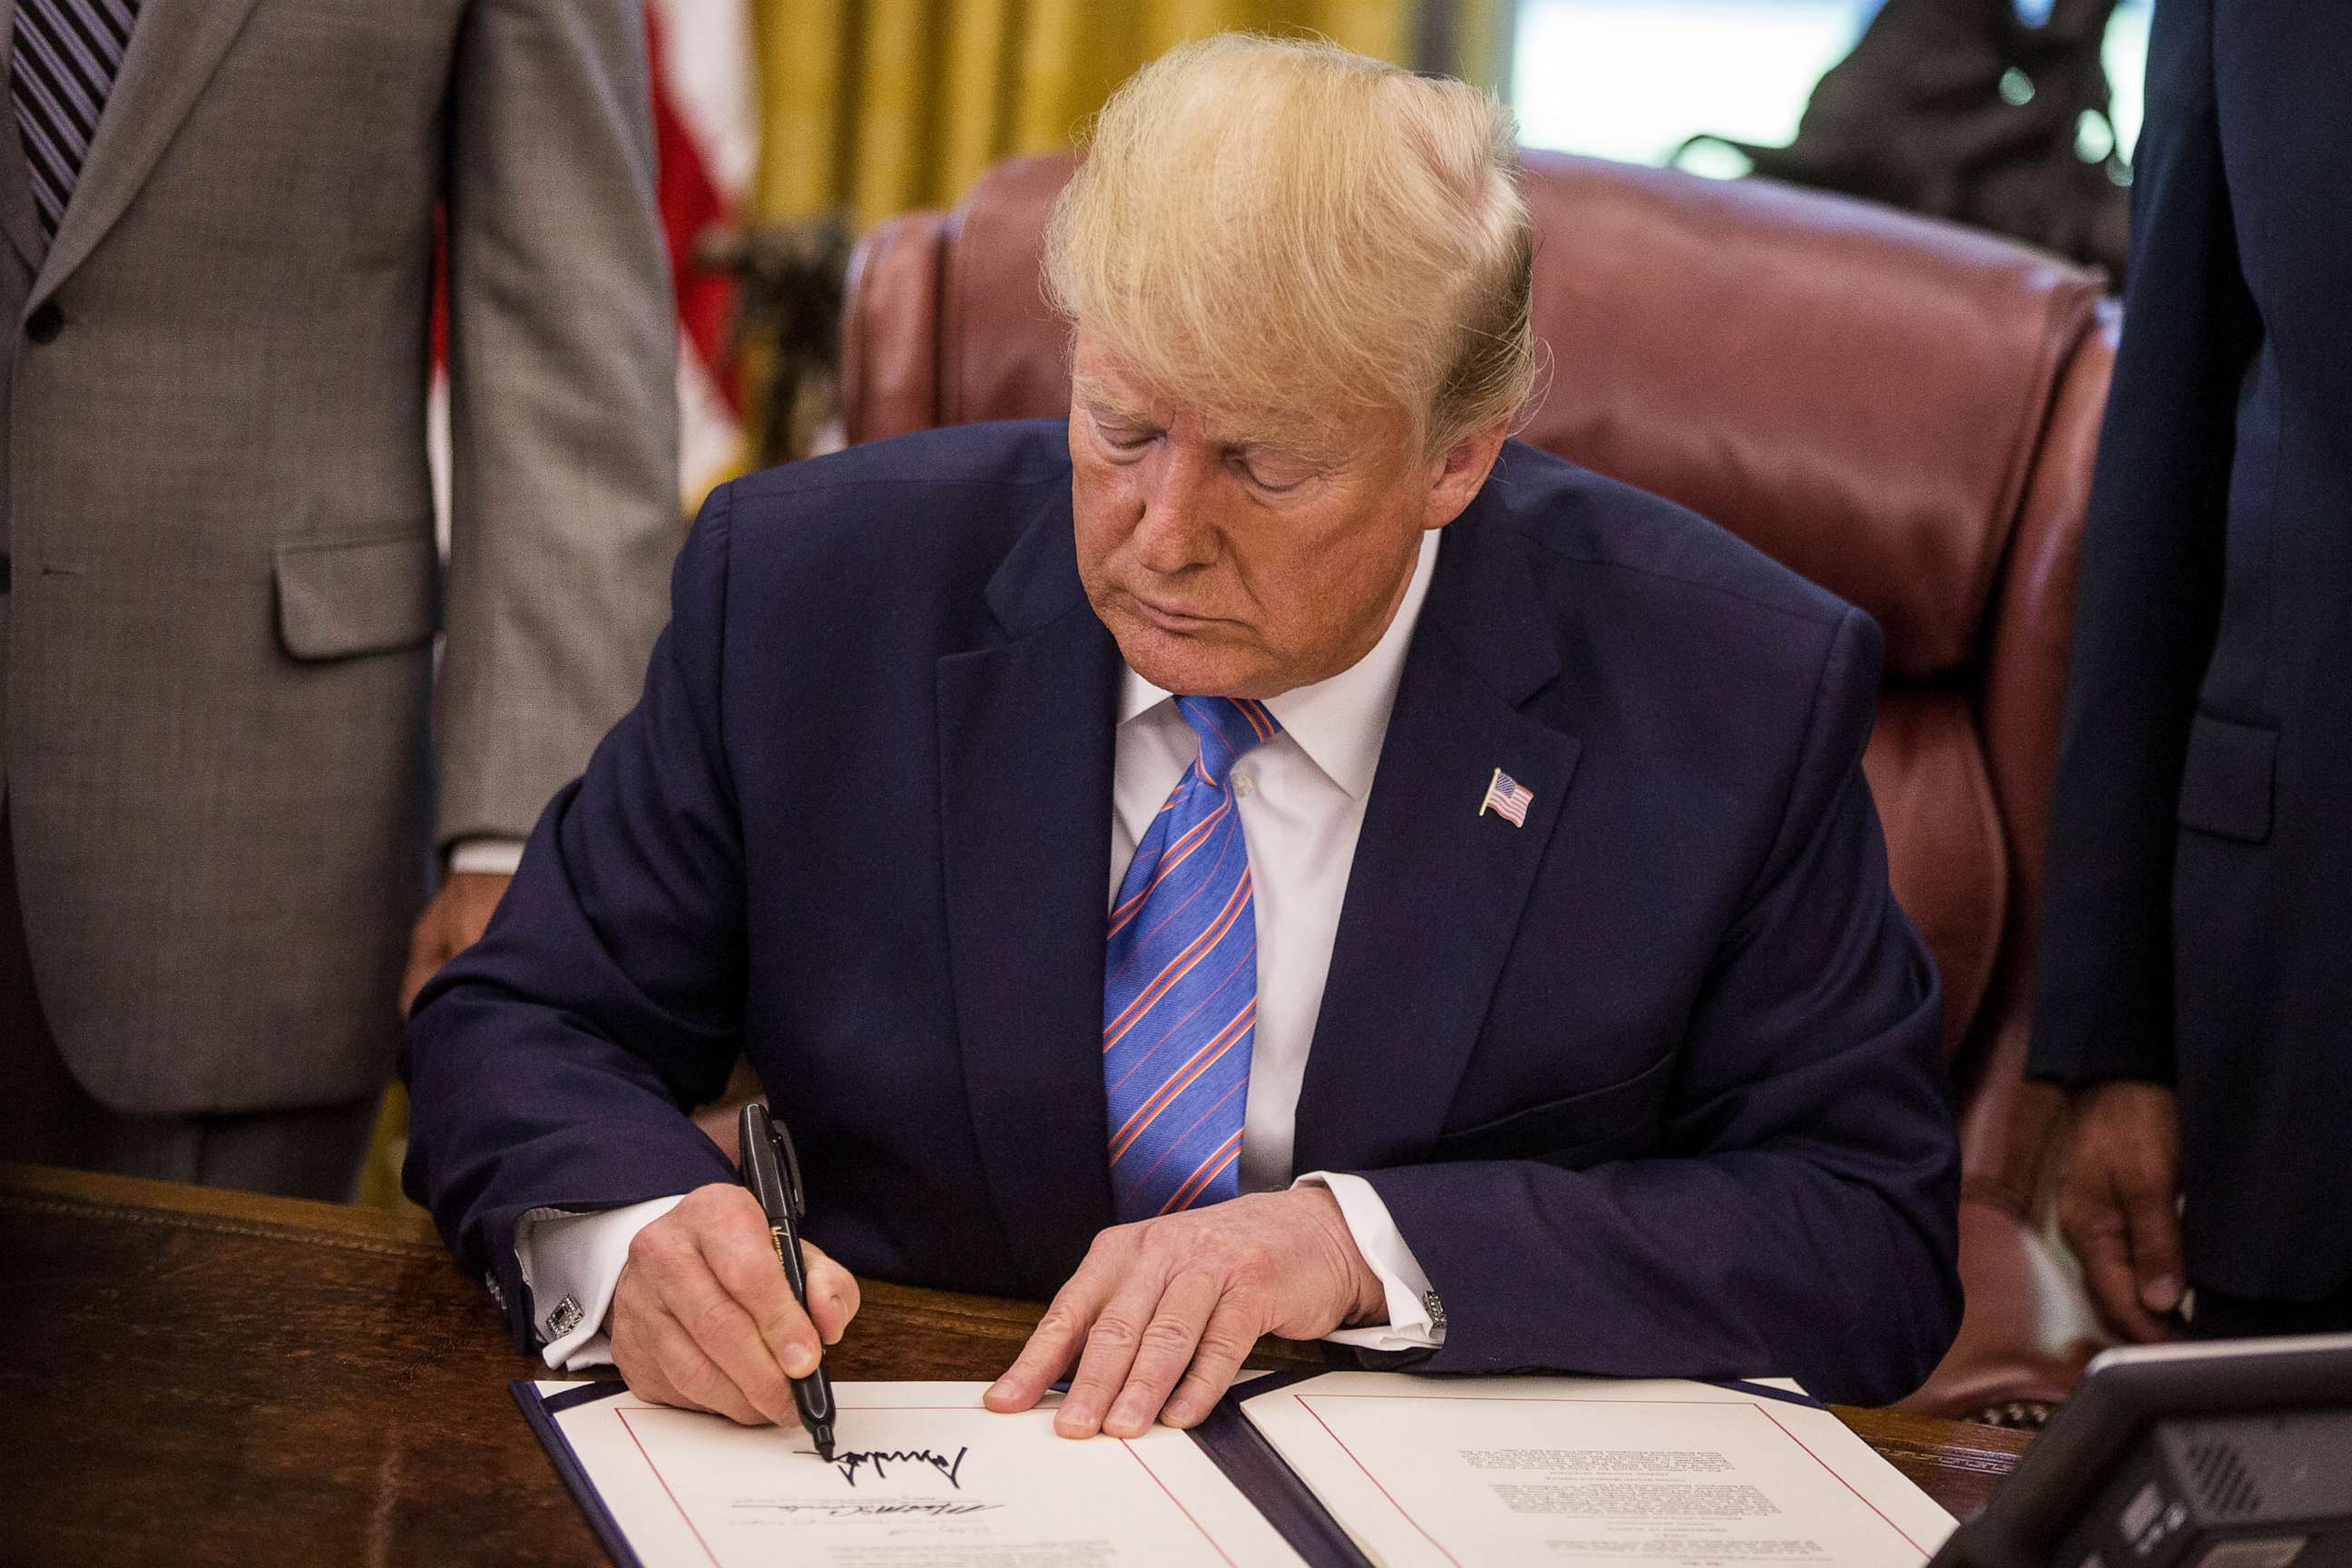 PHOTO: FILE - U.S. President Donald Trump signs H.R. 3151, the Taxpayer First Act, during a ceremony in the Oval Office of the White House in Washington, D.C., July 1, 2019.